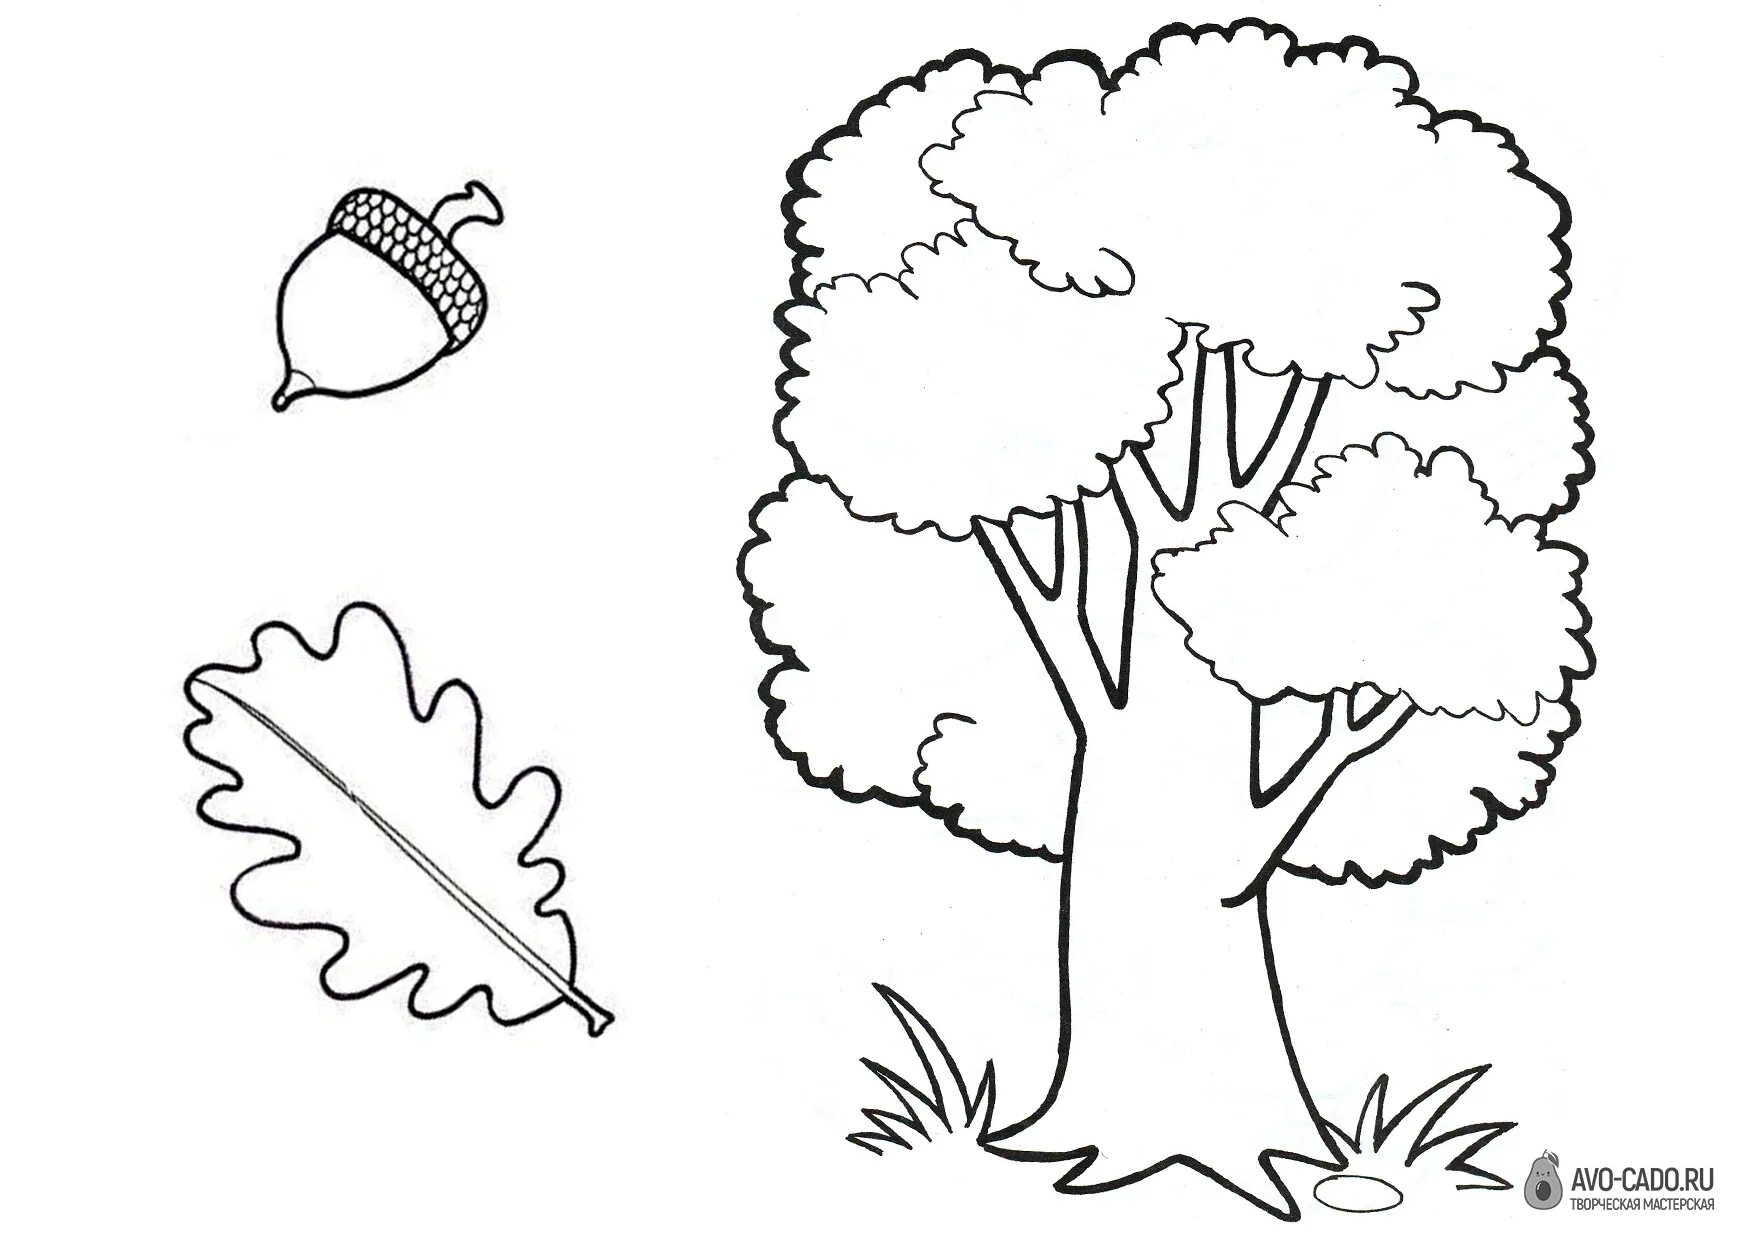 Glamorous tree coloring book for children 5-6 years old